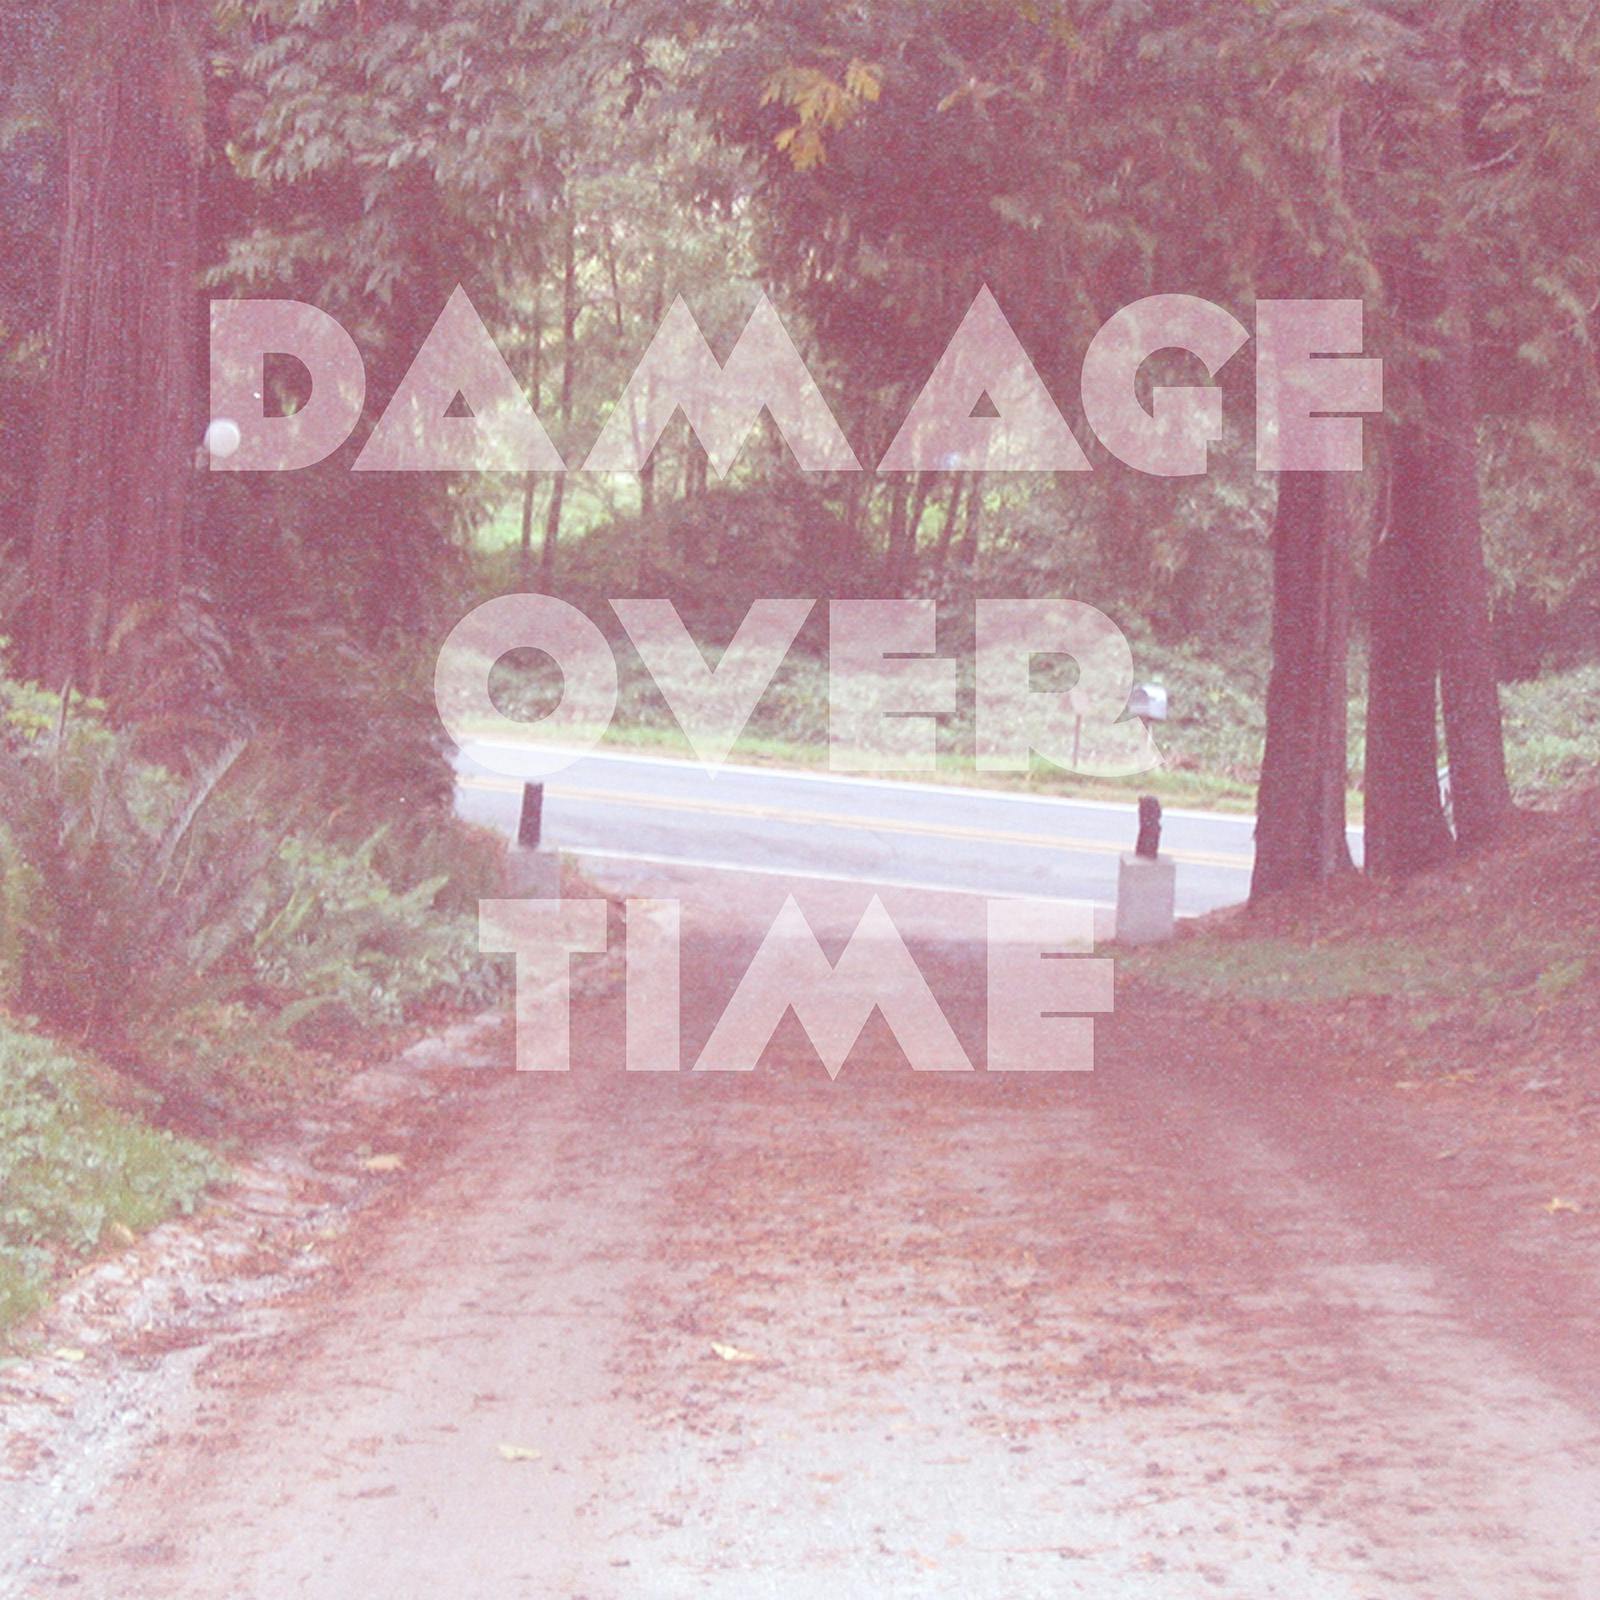 The album art for Damage Over Time. Light pastel pinks and greens over what appears to be the driveway of a home nestled in the woods.